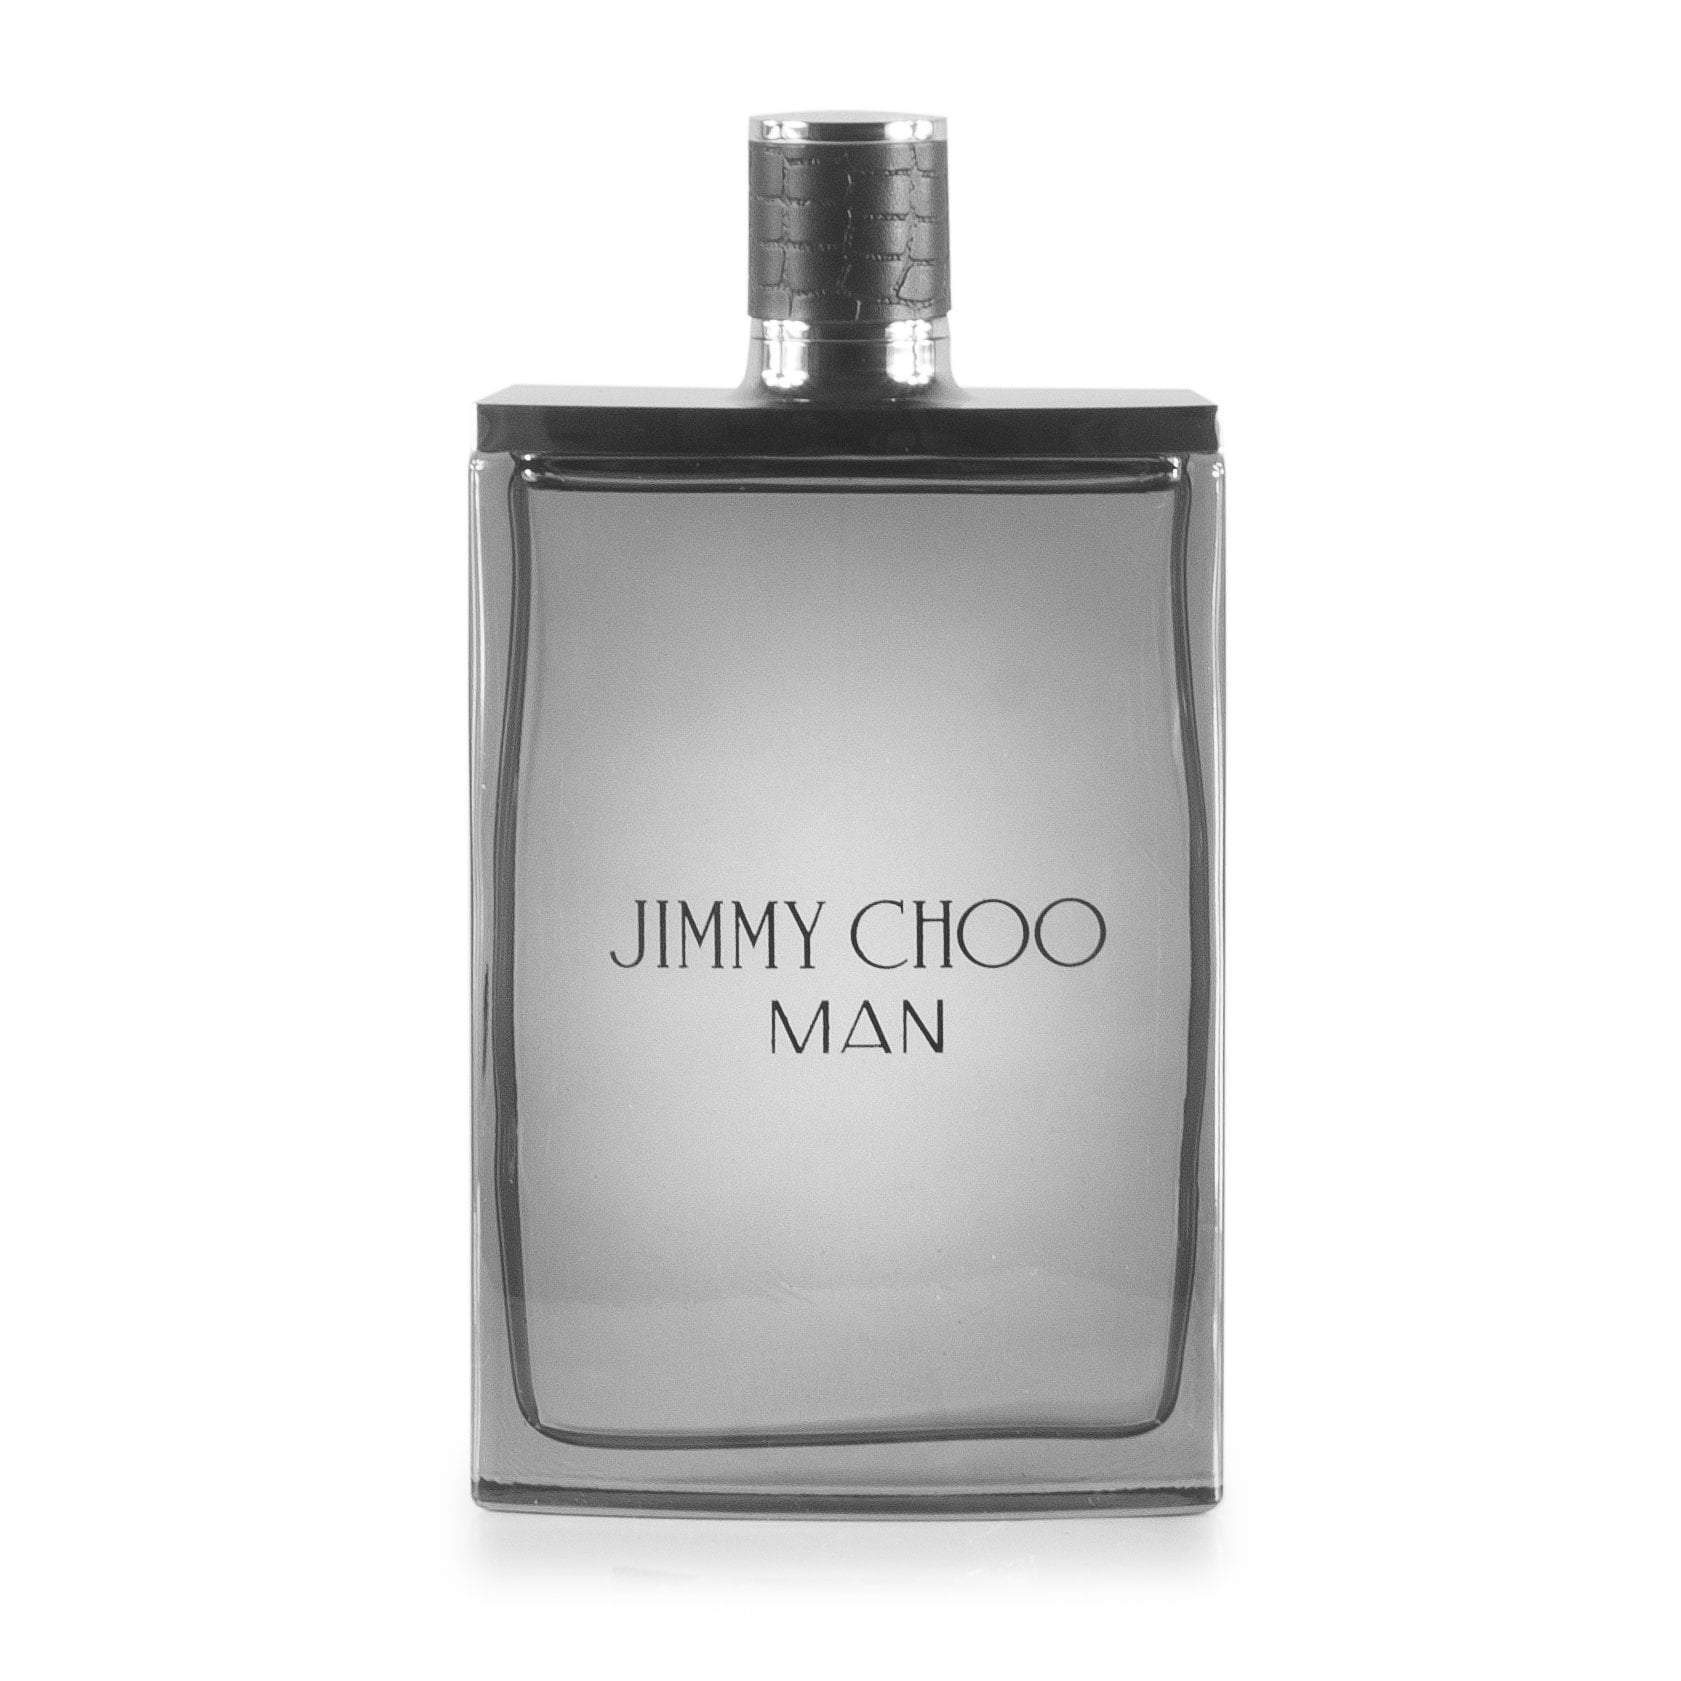 Man Blue Edt by Jimmy Choo Fragrance at ORCHARD MILE